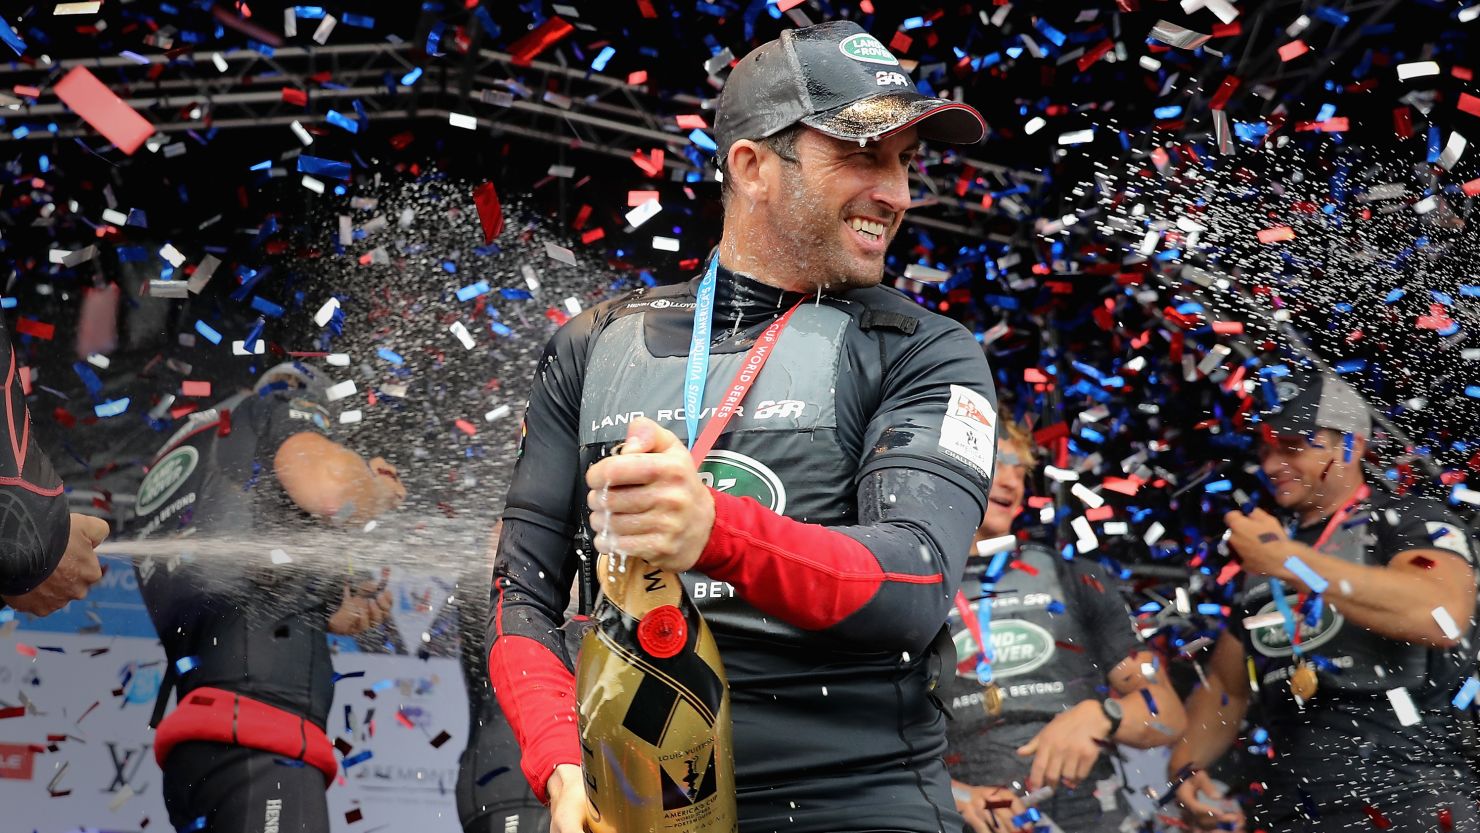 Ben Ainslie Celebrates victory with team Land Rover BAR at the America's Cup World Series in Portsmouth, England.